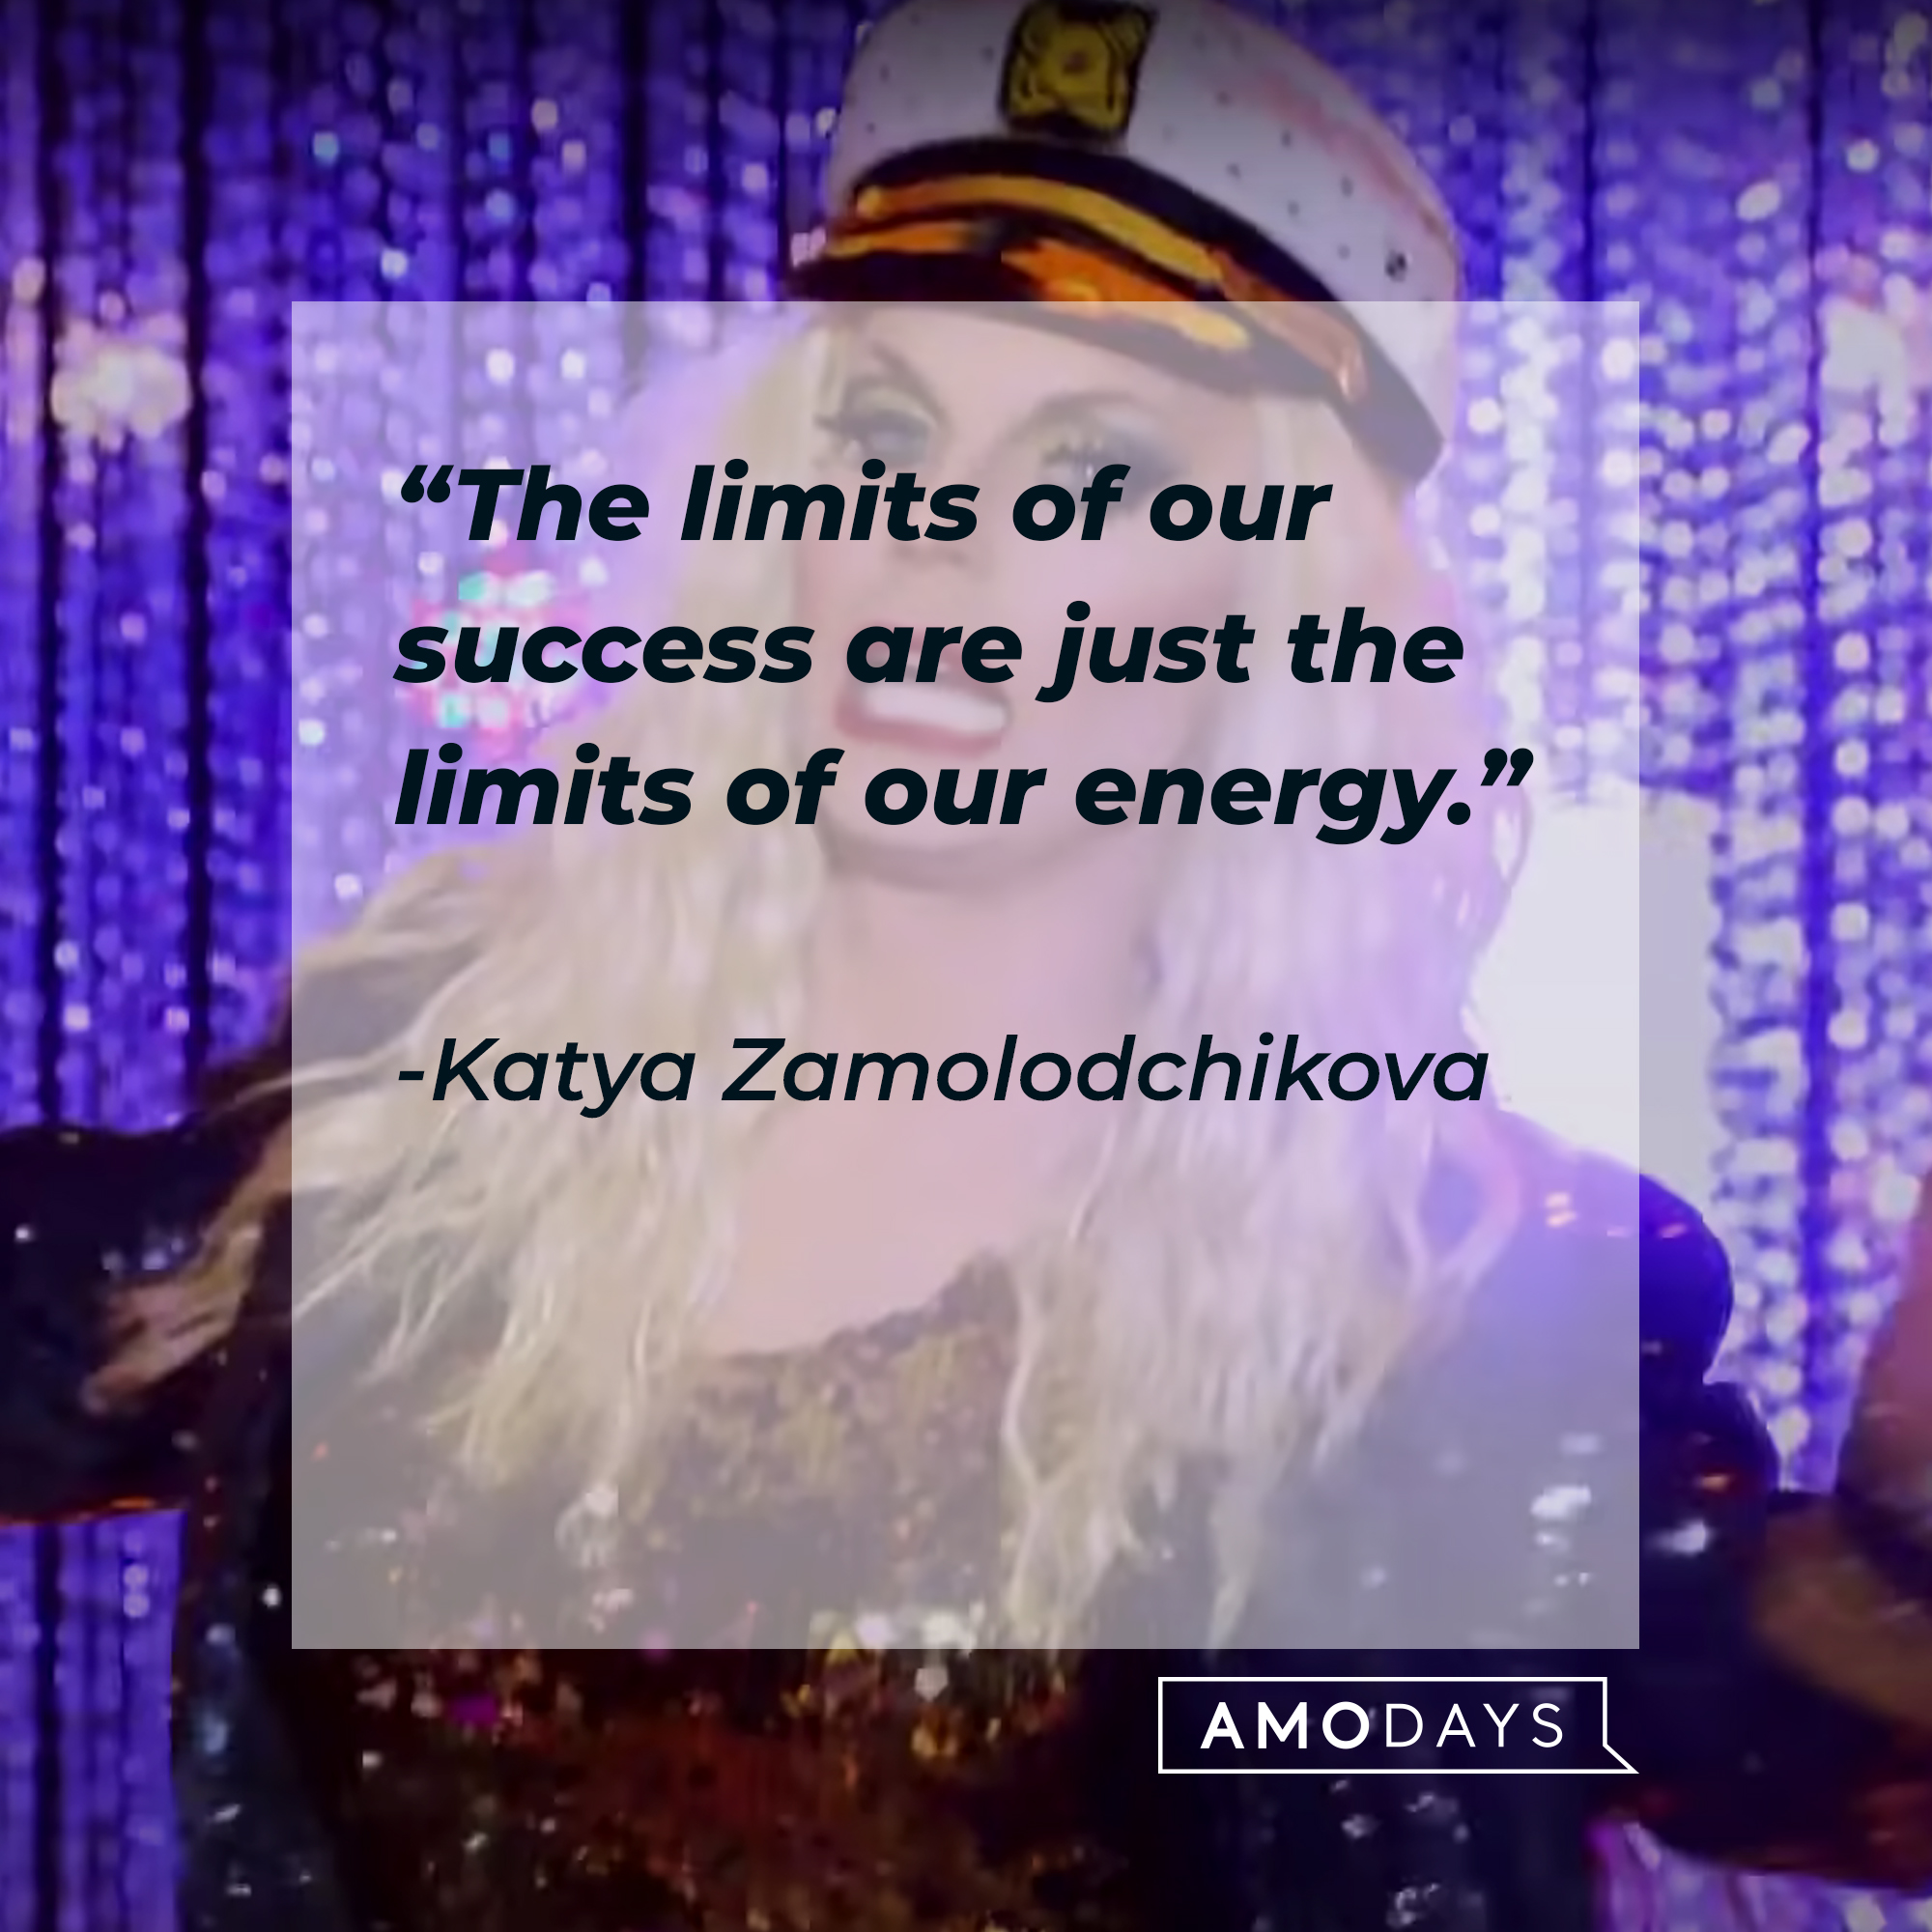 Katya Zamolodchikova, with her quote: “The limits of our success are just the limits of our energy.” | Source: youtube.com/rupaulsdragrace